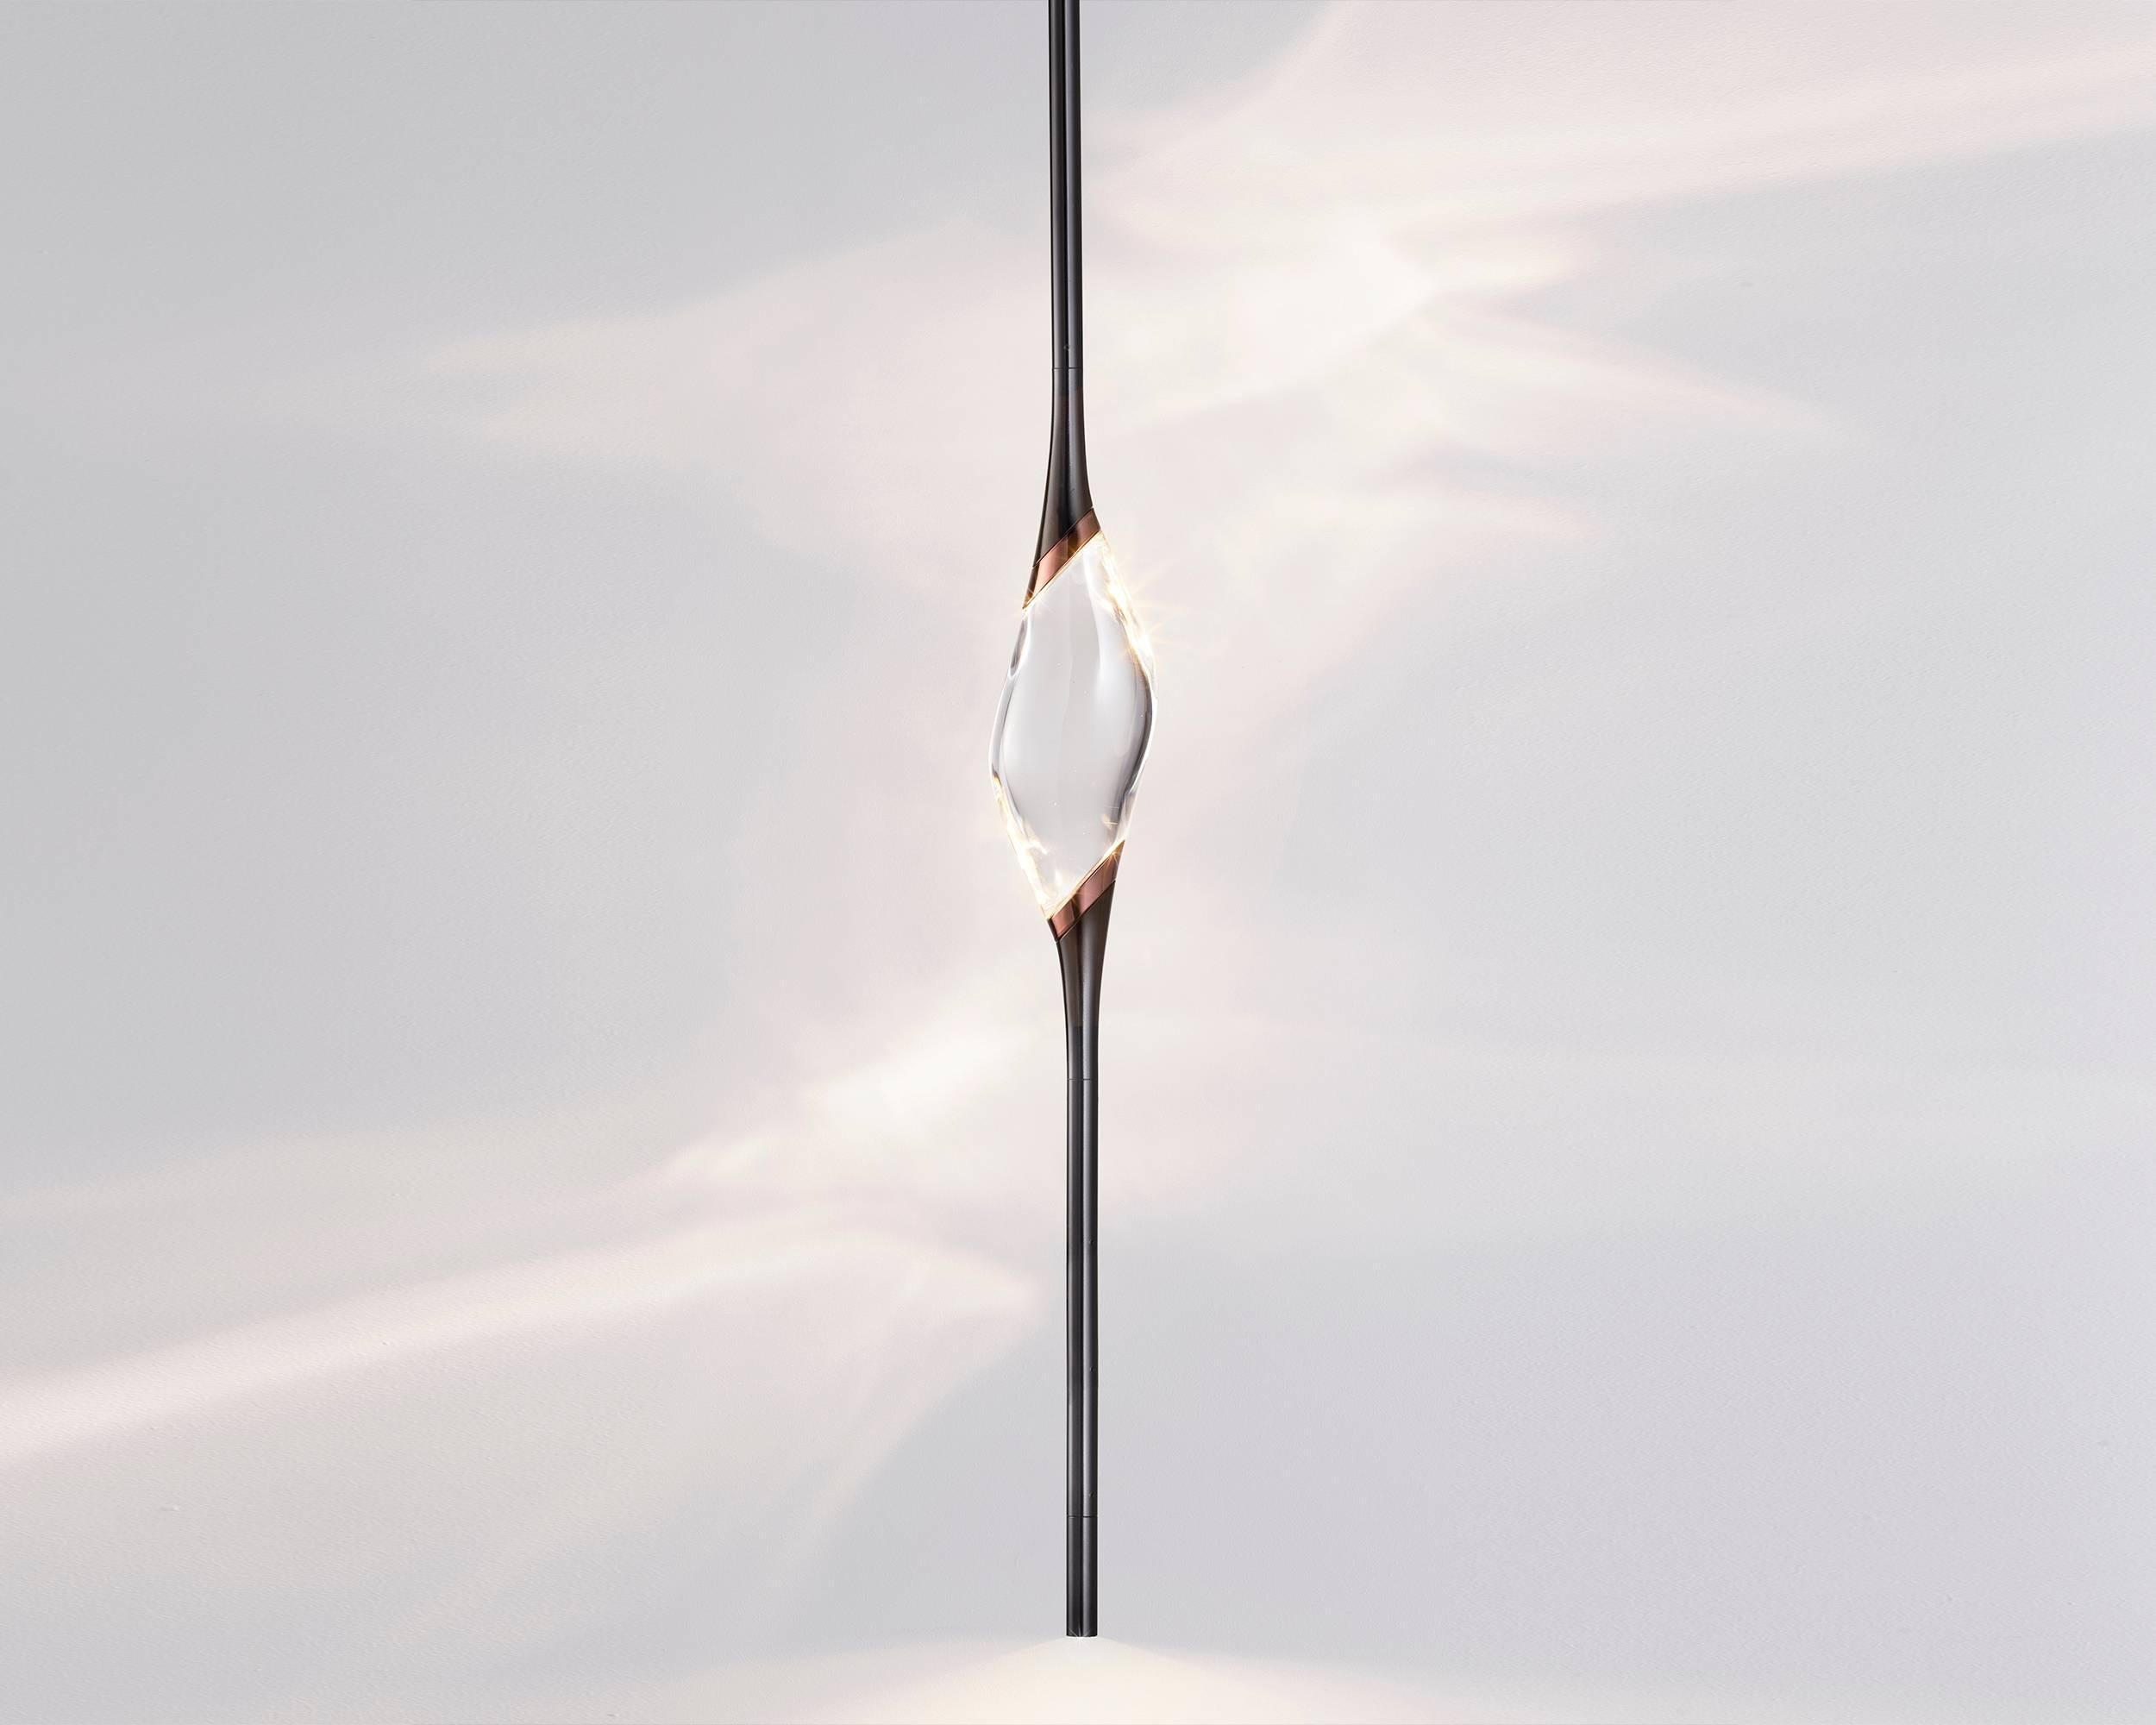 Il Pezzo 12 is a female figure suspended in the air, carrying in her womb the light. It’s nimble, refined, addictive. The solid crystal, illuminated by LEDs, creates suggestive refractions and it’s suspended between brass stems finished in